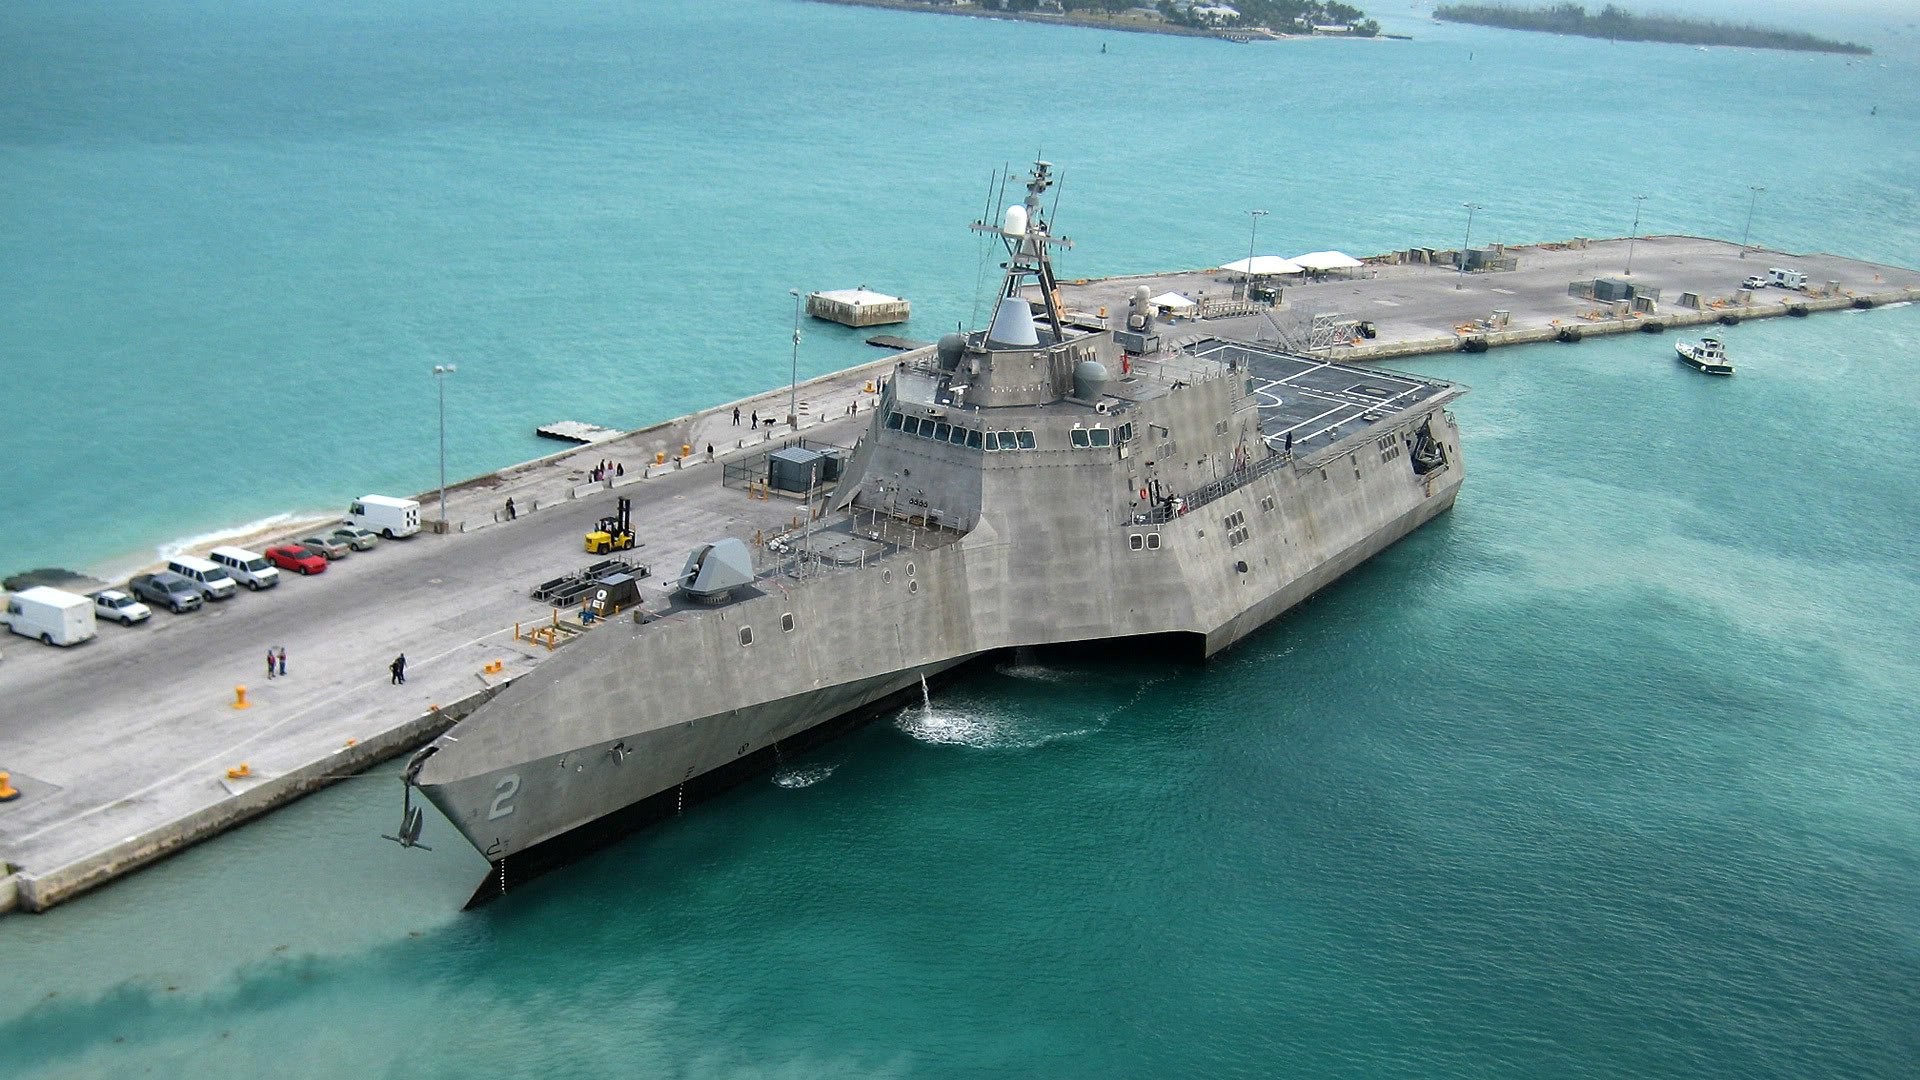 1920x1080 Military - USS Independence (LCS-2) Ship Littoral Combat Ship Wallpaper